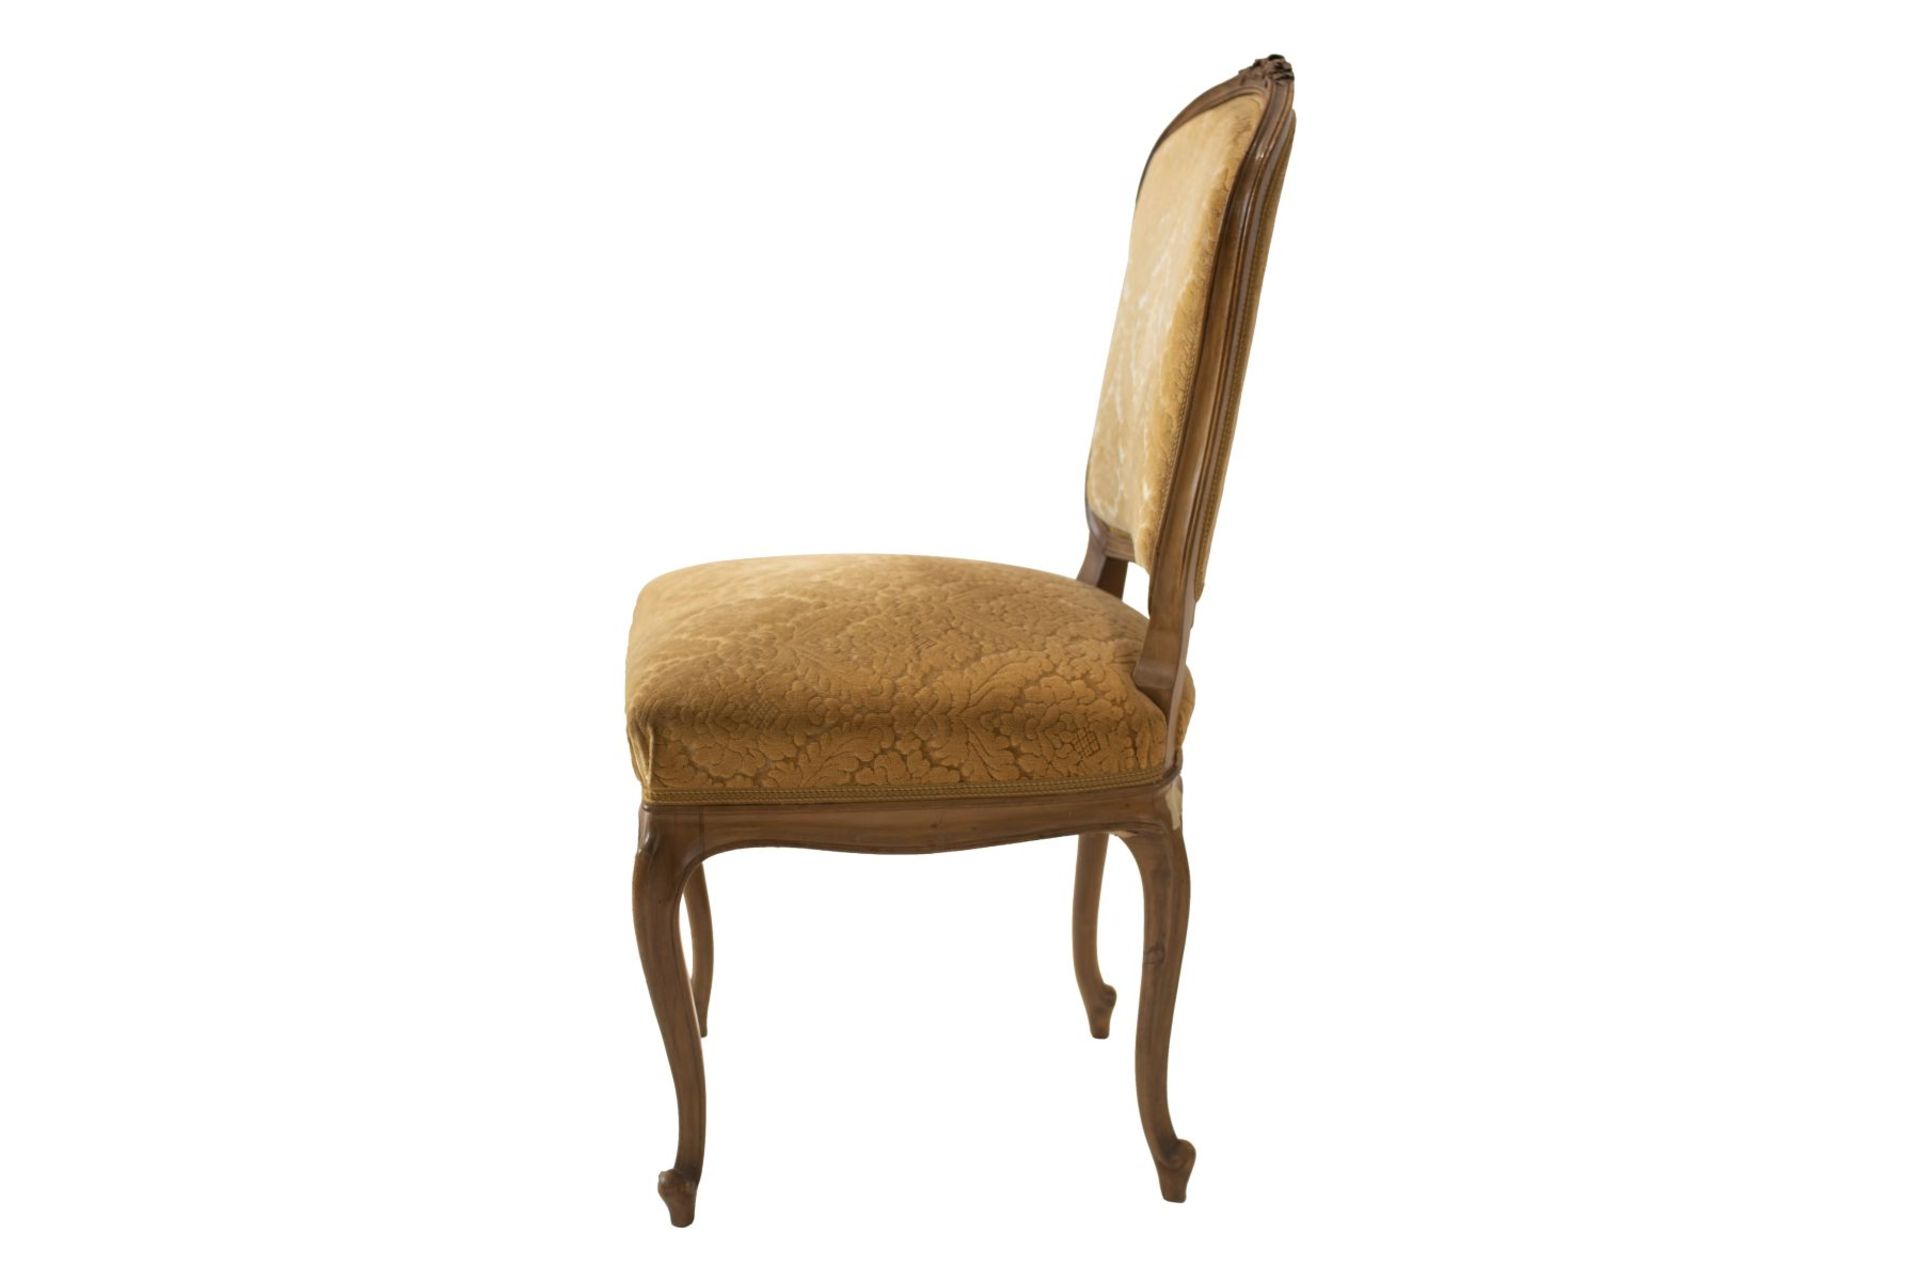 6 Dining Room Chairs | 6 Esszimmer Stuehle - Image 3 of 6